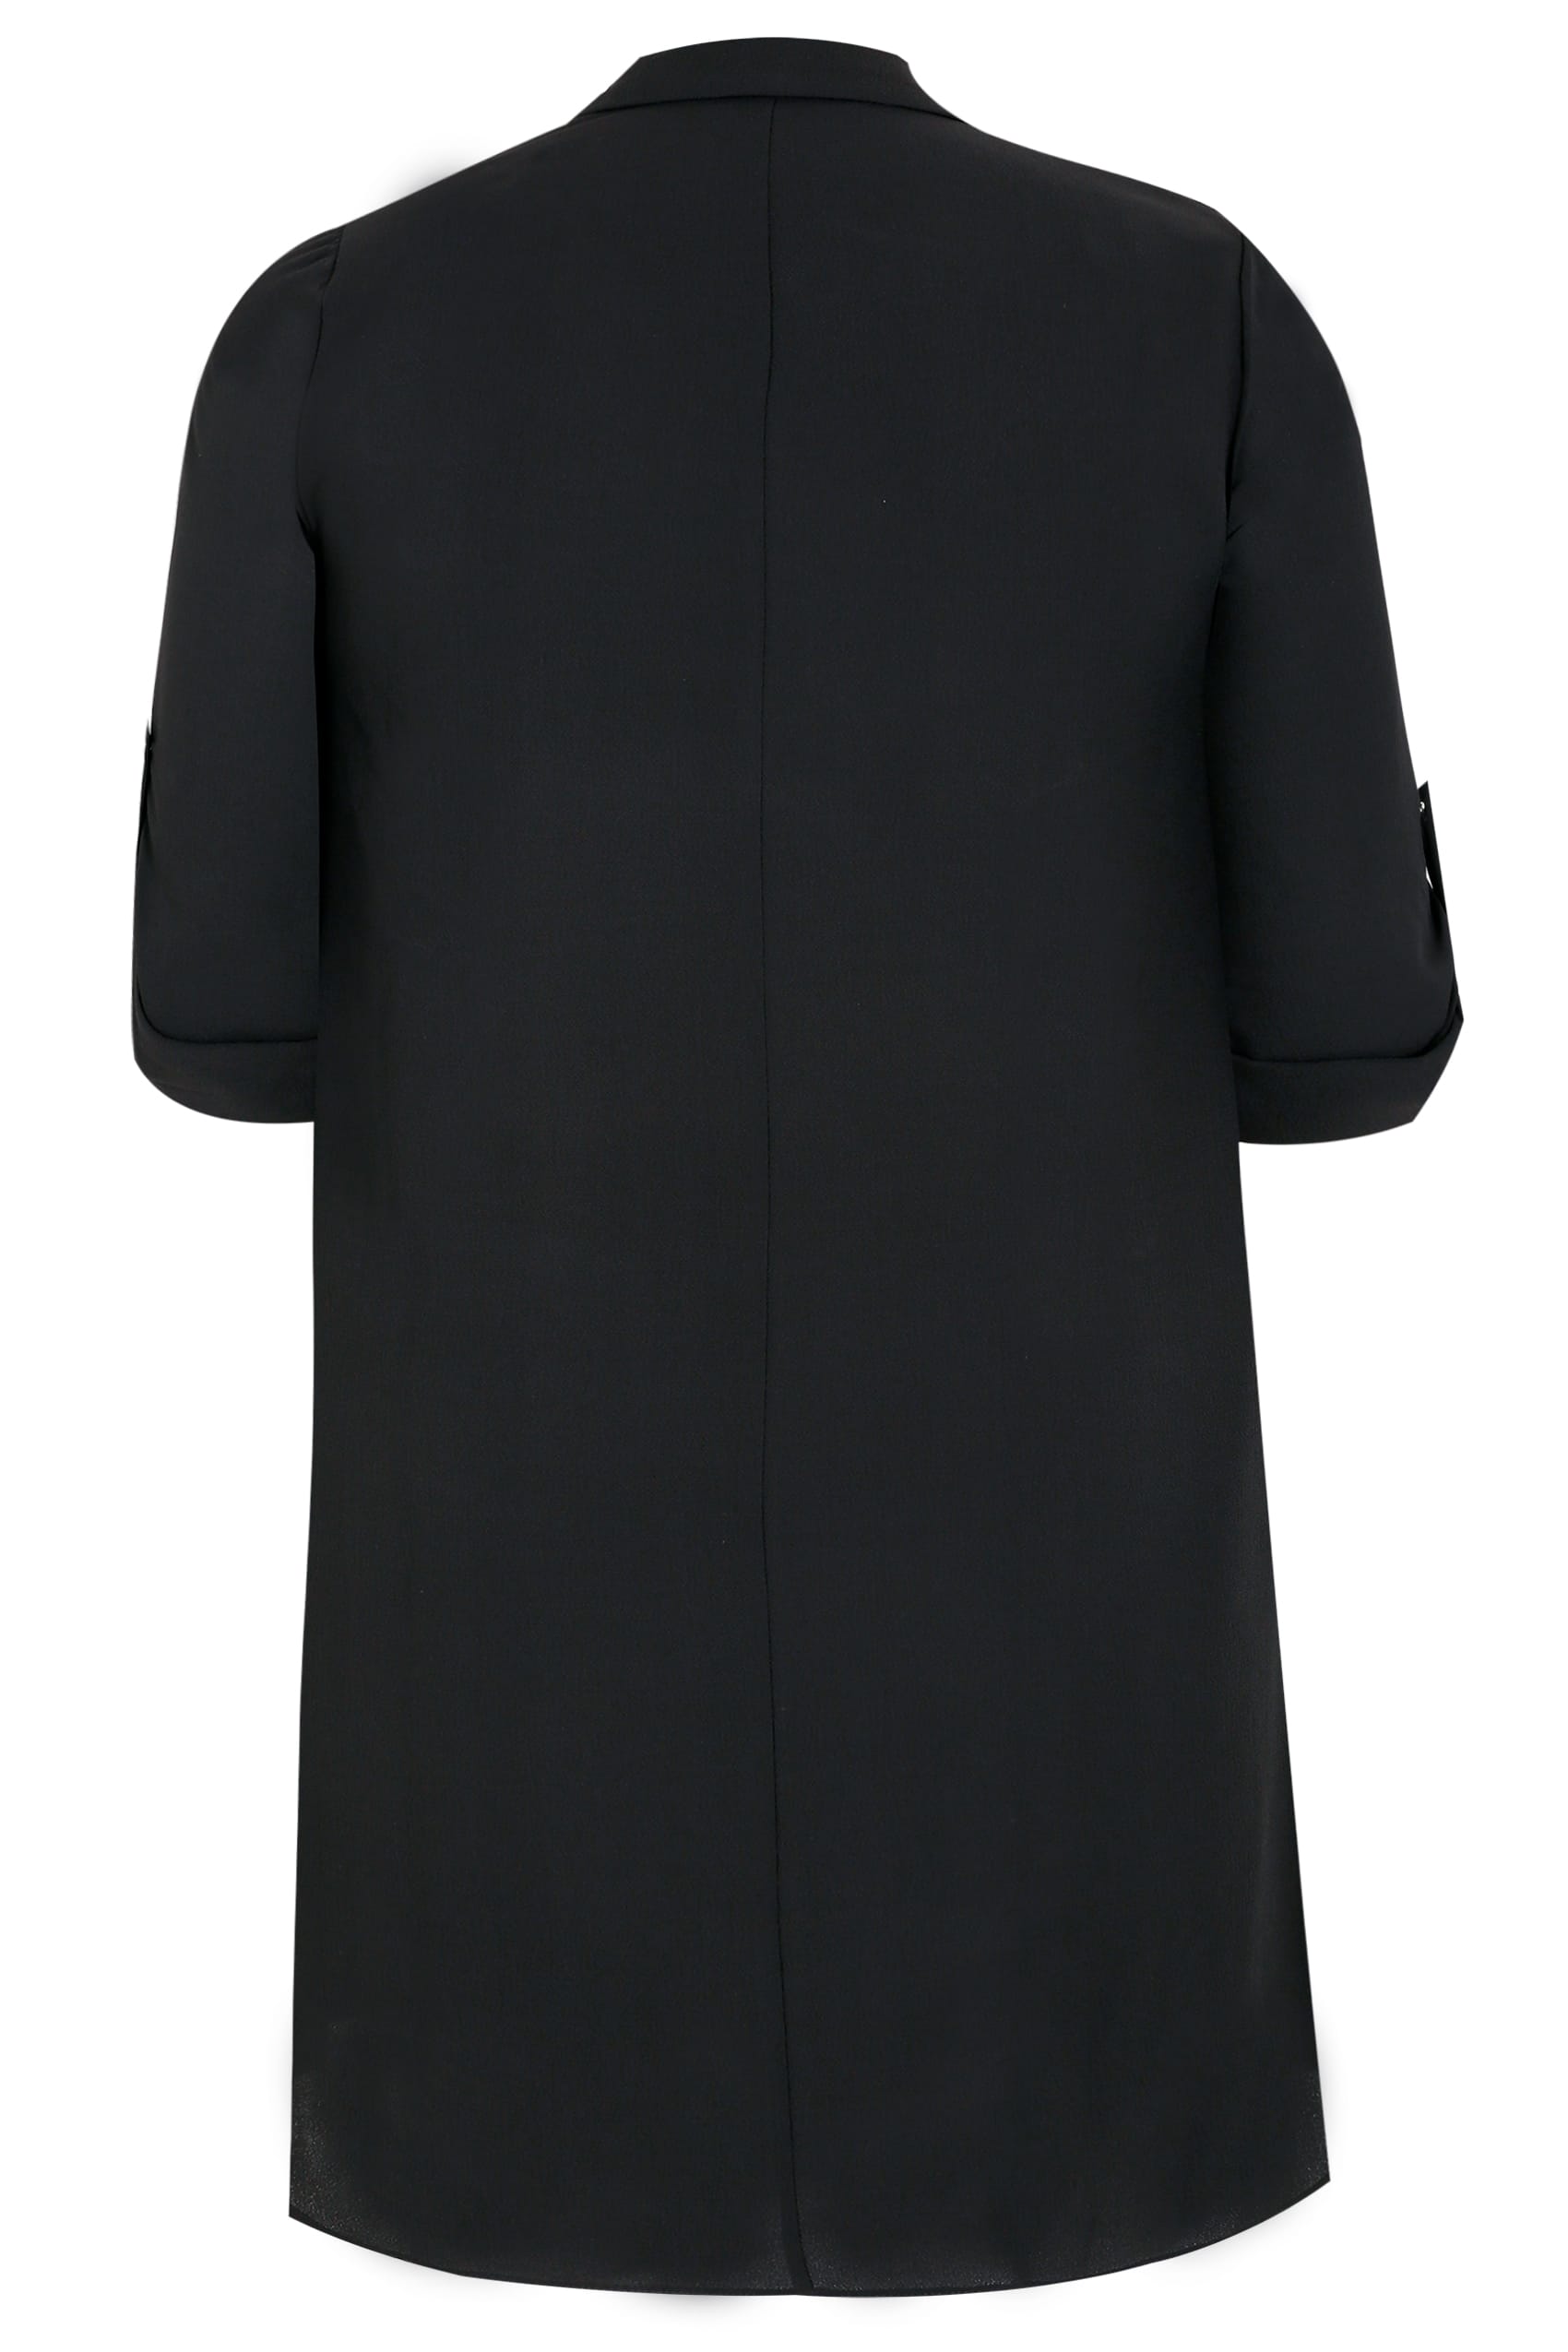 Black Lightweight Duster Jacket With Waterfall Front, Plus size 16 to ...